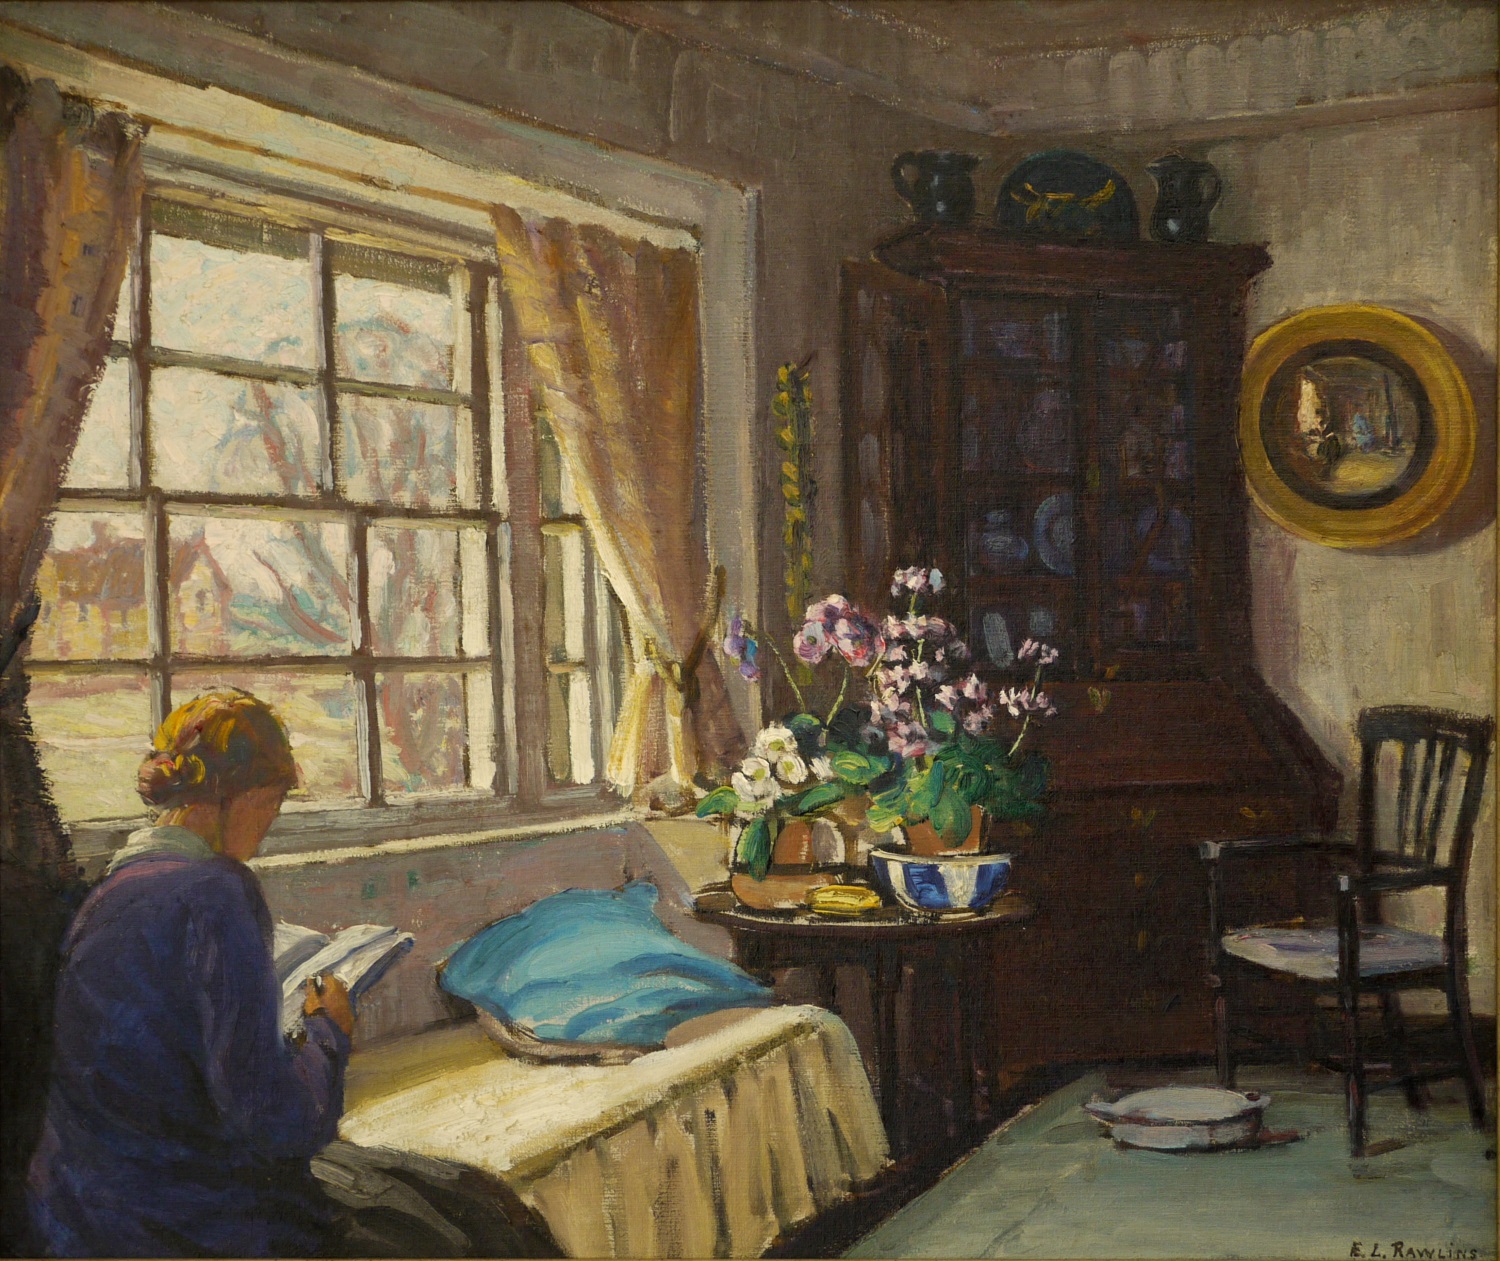 Ethel Louise Rawlins – A Quiet Moment